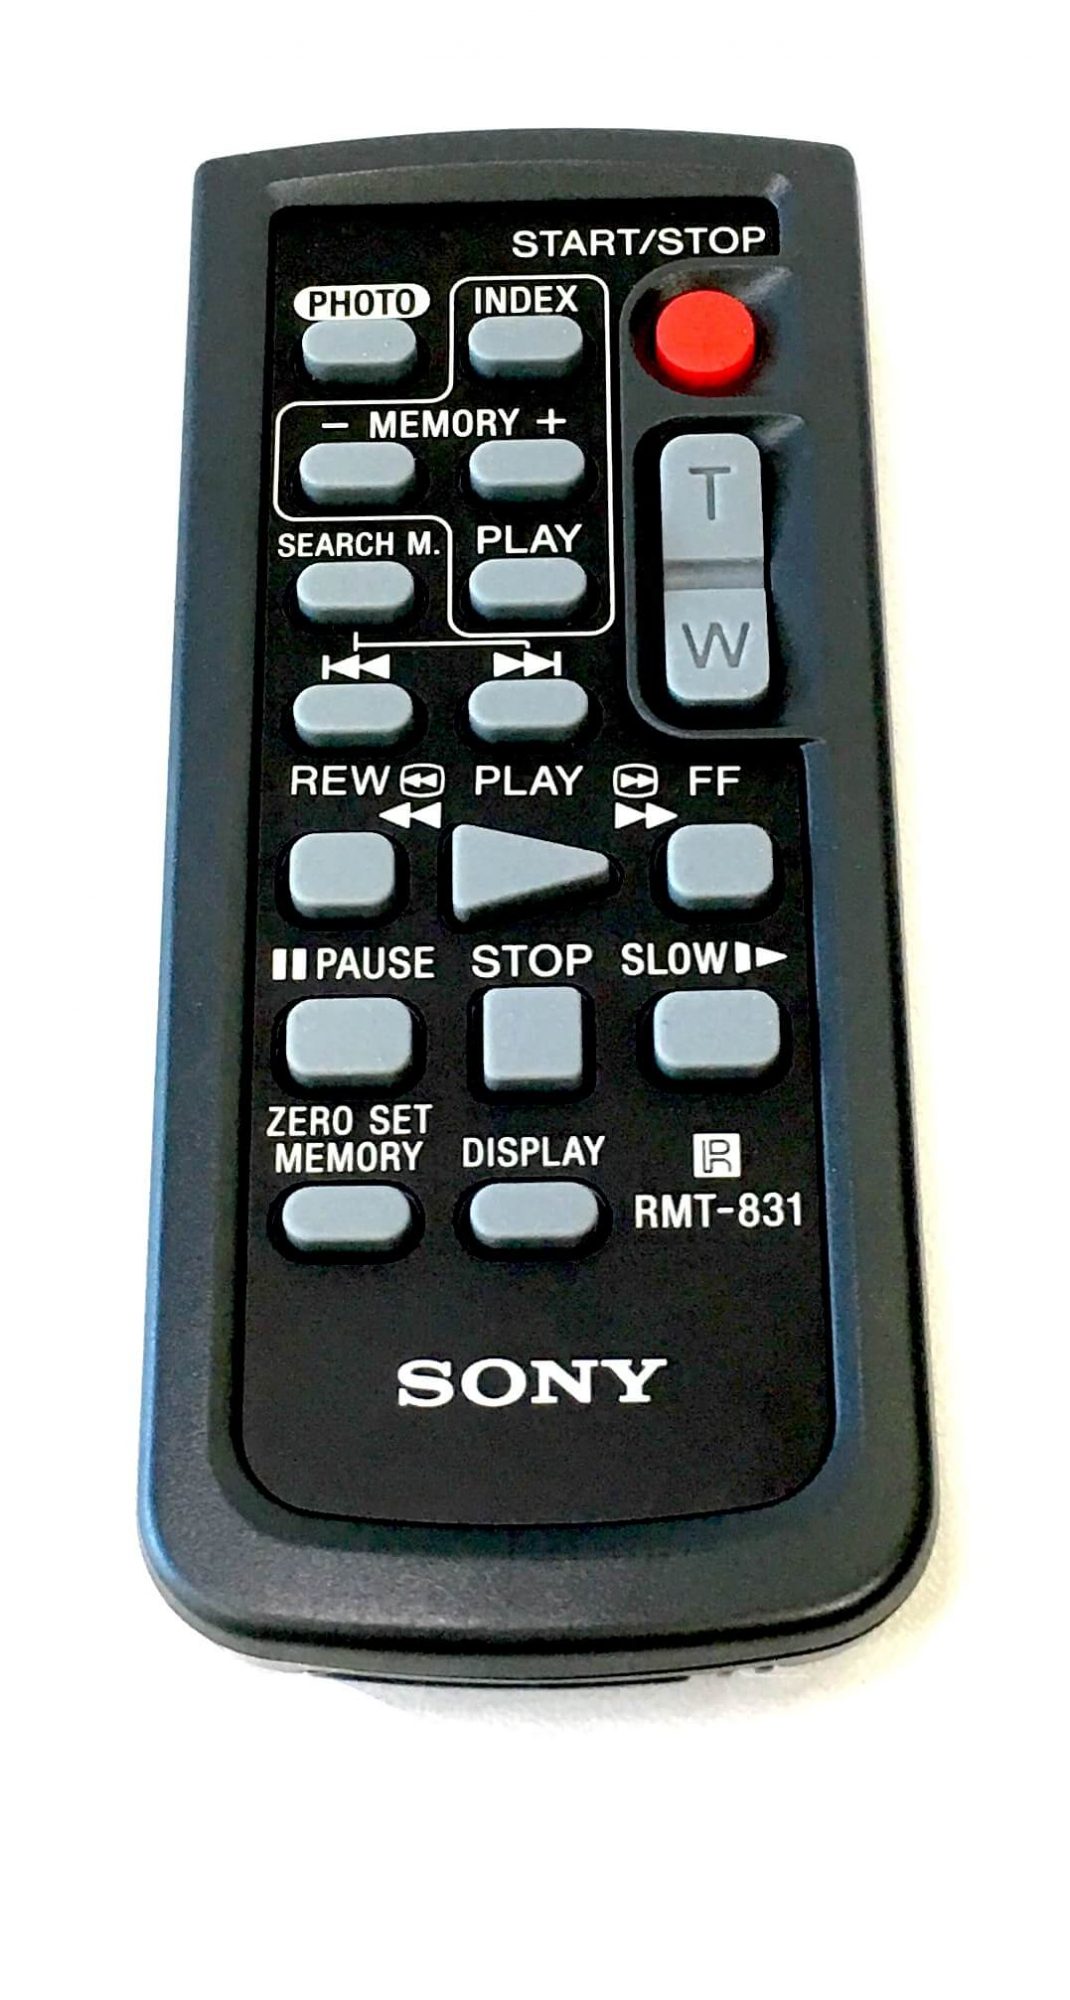 Original wireless remote control that came with the Sony HVR-Z7U camcorder. It is a genuine Sony part, sourced directly from Sony USA. Brand new factory fresh. Free Shipping.